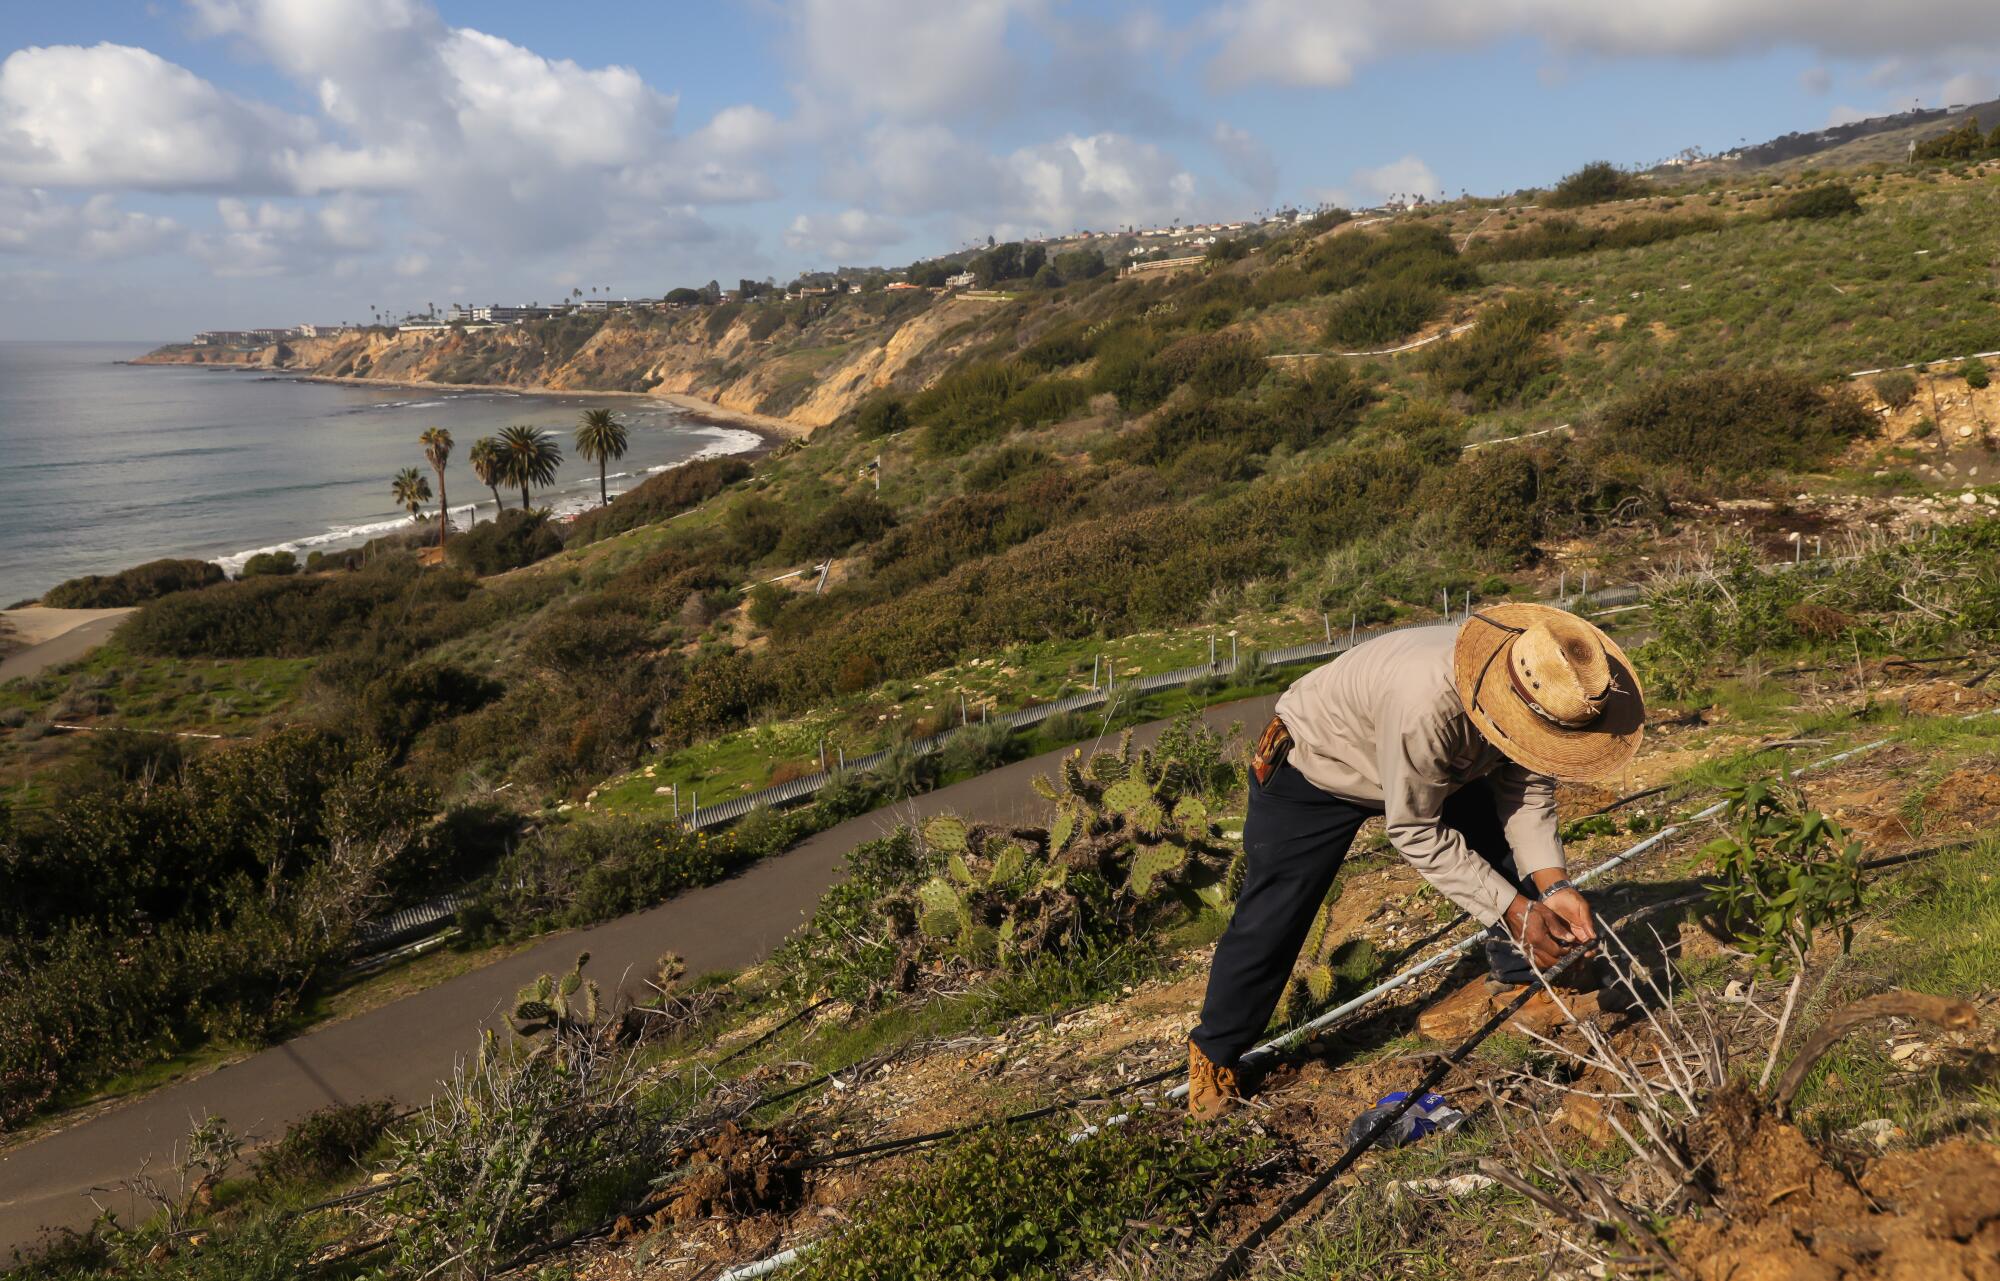 A man in a straw hat tends to a hillside plant along the coast in Rancho Palos Verdes.